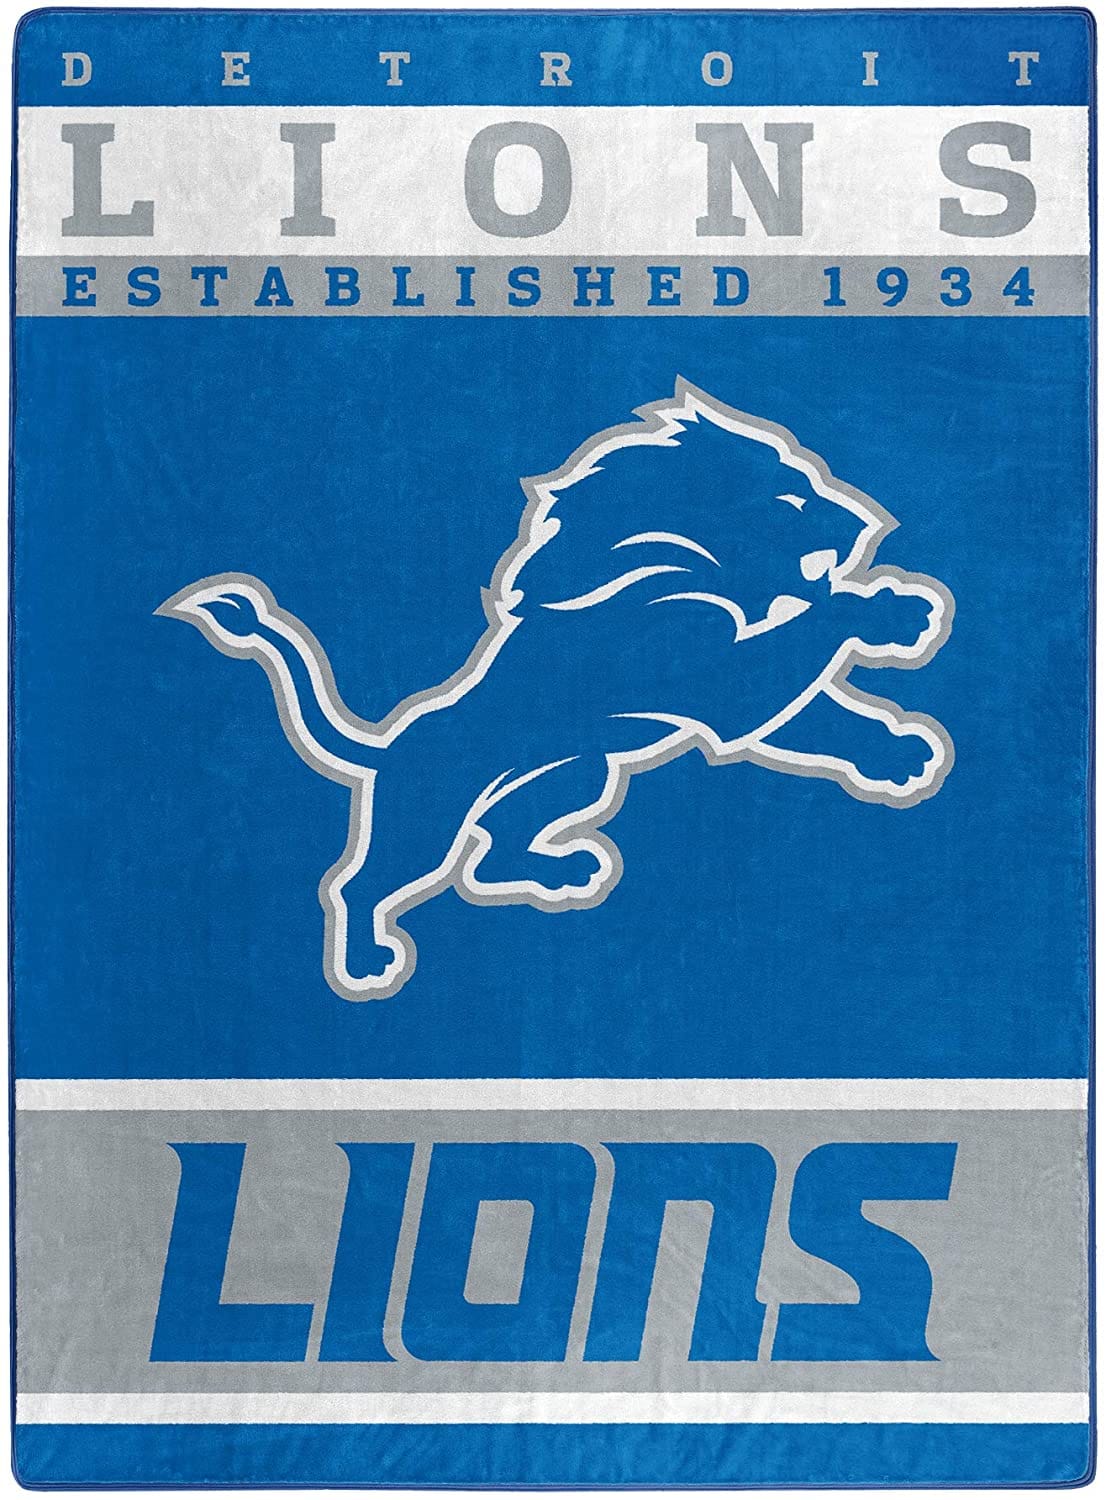 The Officially Licensed Nfl Throw Detroit Lions Fleece Blanket